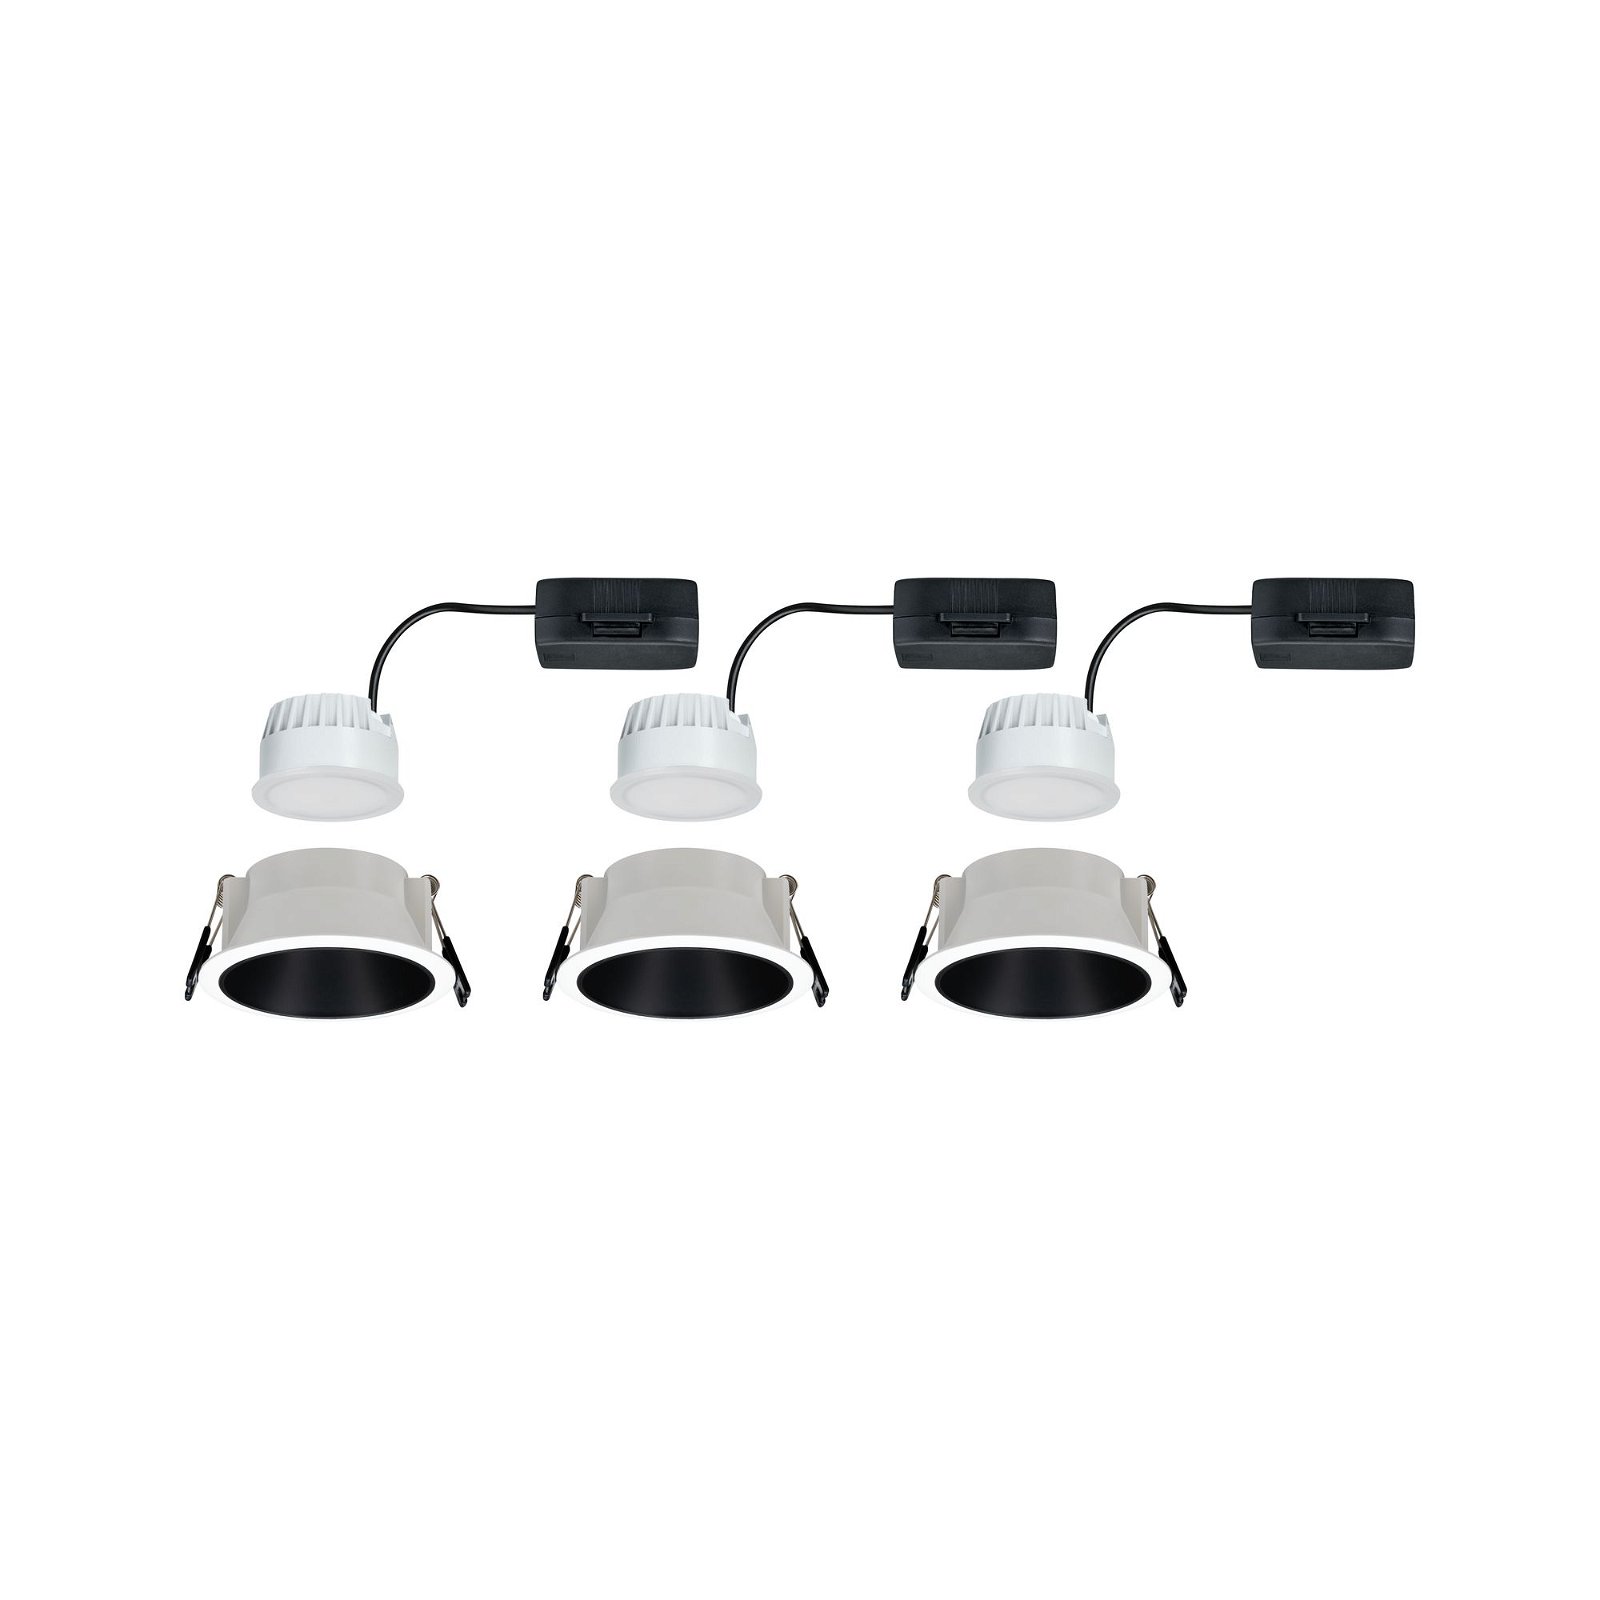 LED Recessed luminaire 3-Step-Dim Cole Coin Basic Set IP44 round 88mm Coin 3x6W 3x470lm 230V dimmable 2700K White/Black matt